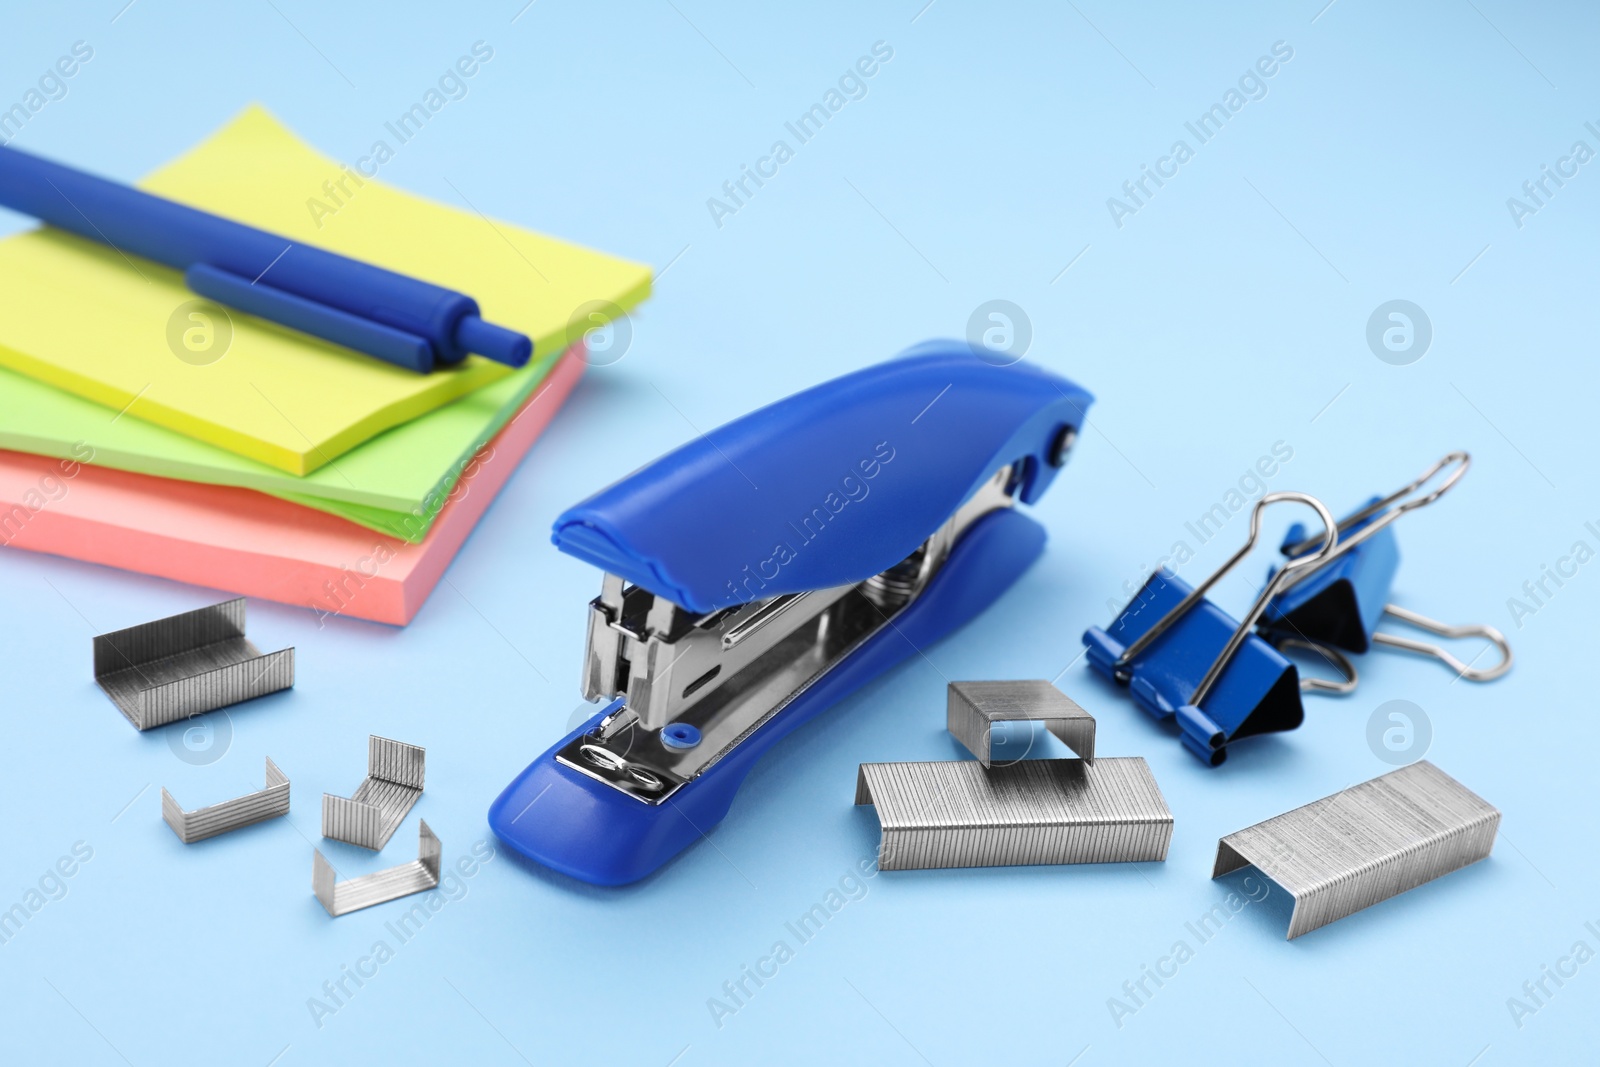 Photo of New bright stapler with stationery on light blue background